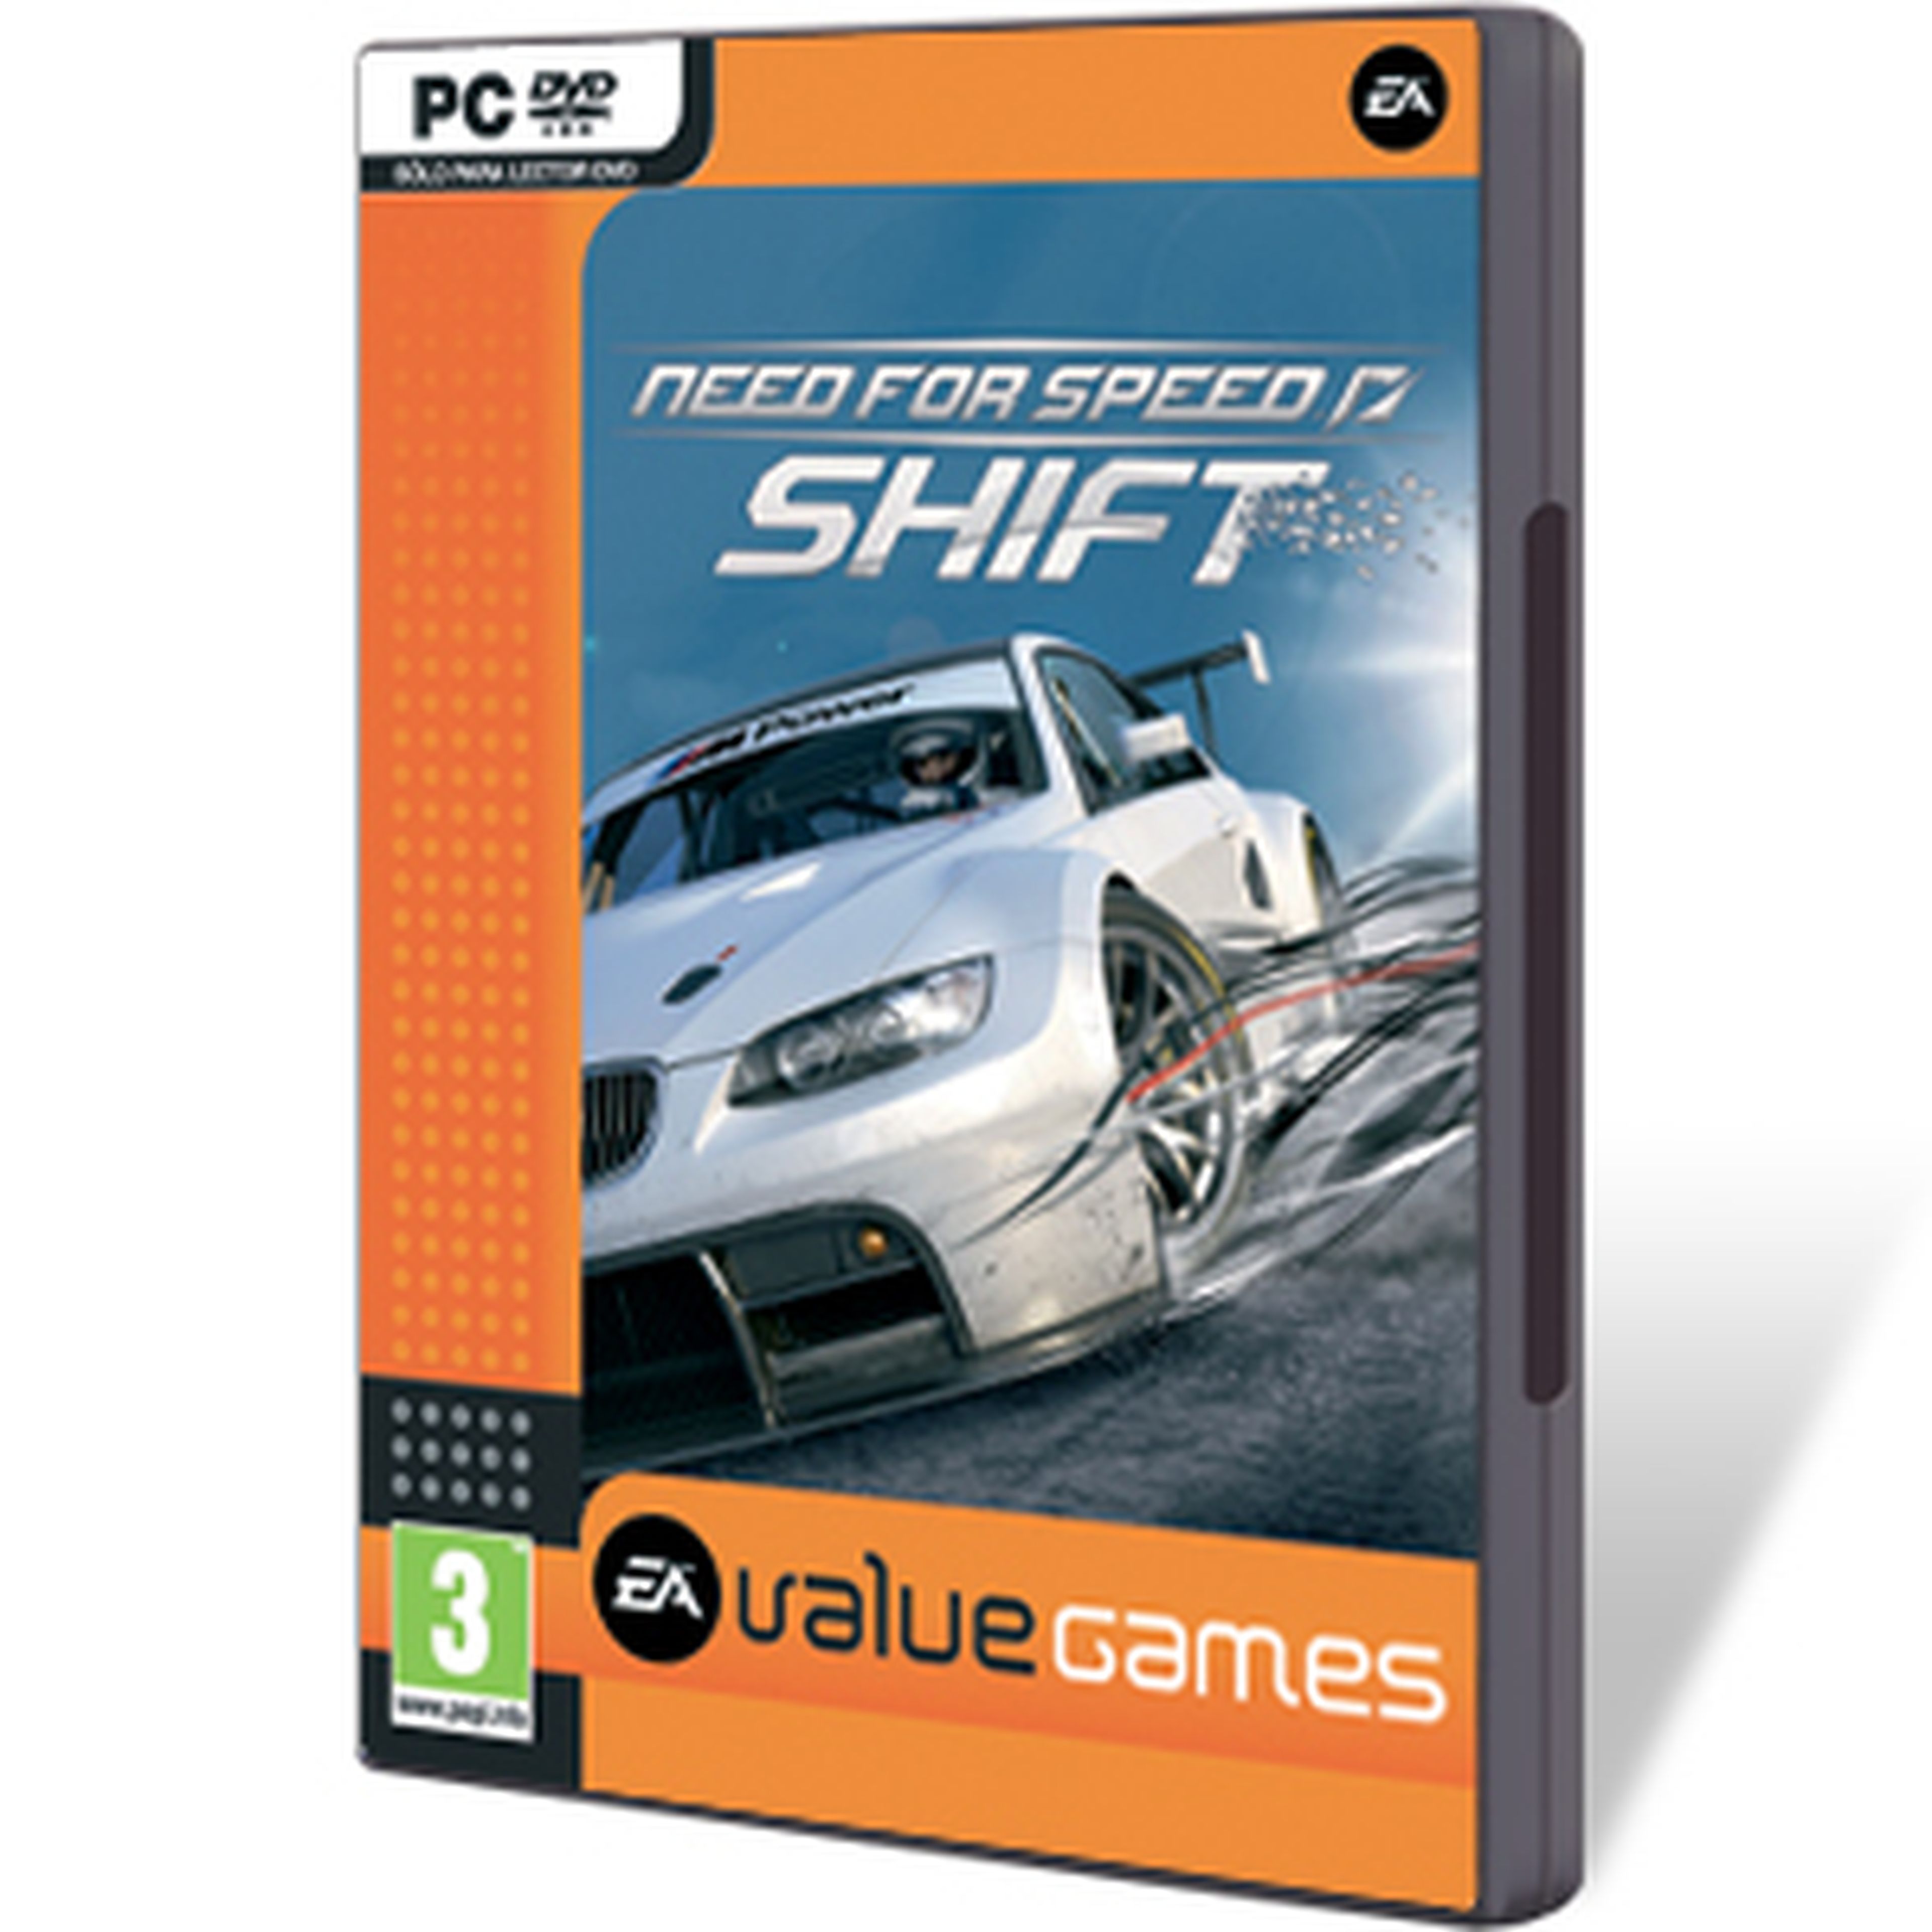 Need for Speed SHIFT para PC